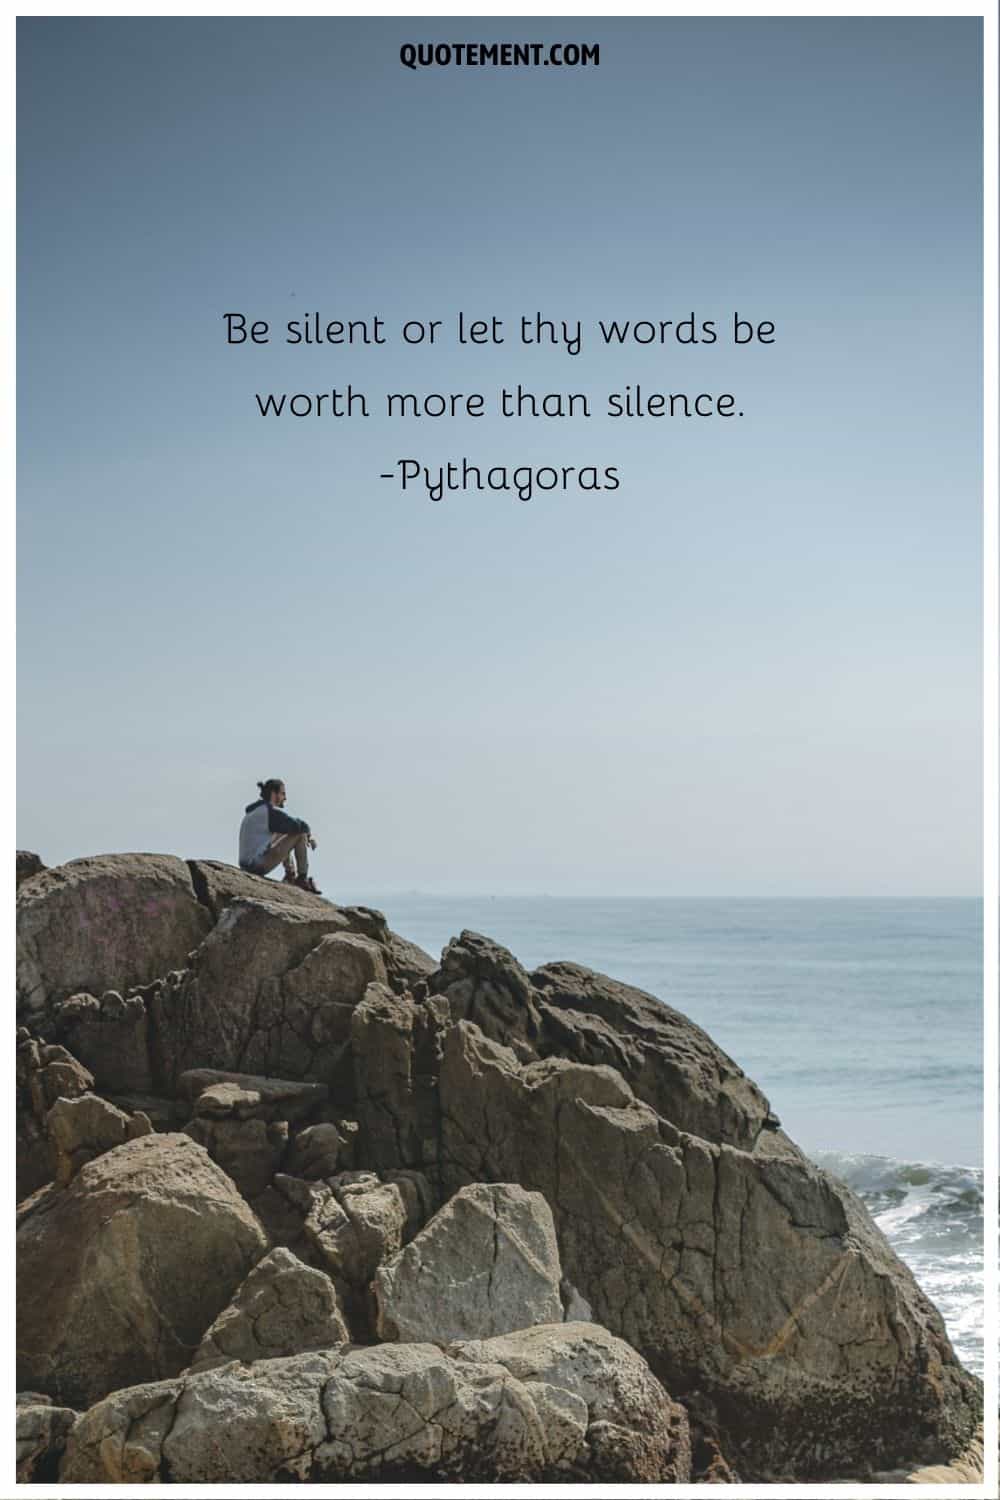 “Be silent or let thy words be worth more than silence.” ― Pythagoras